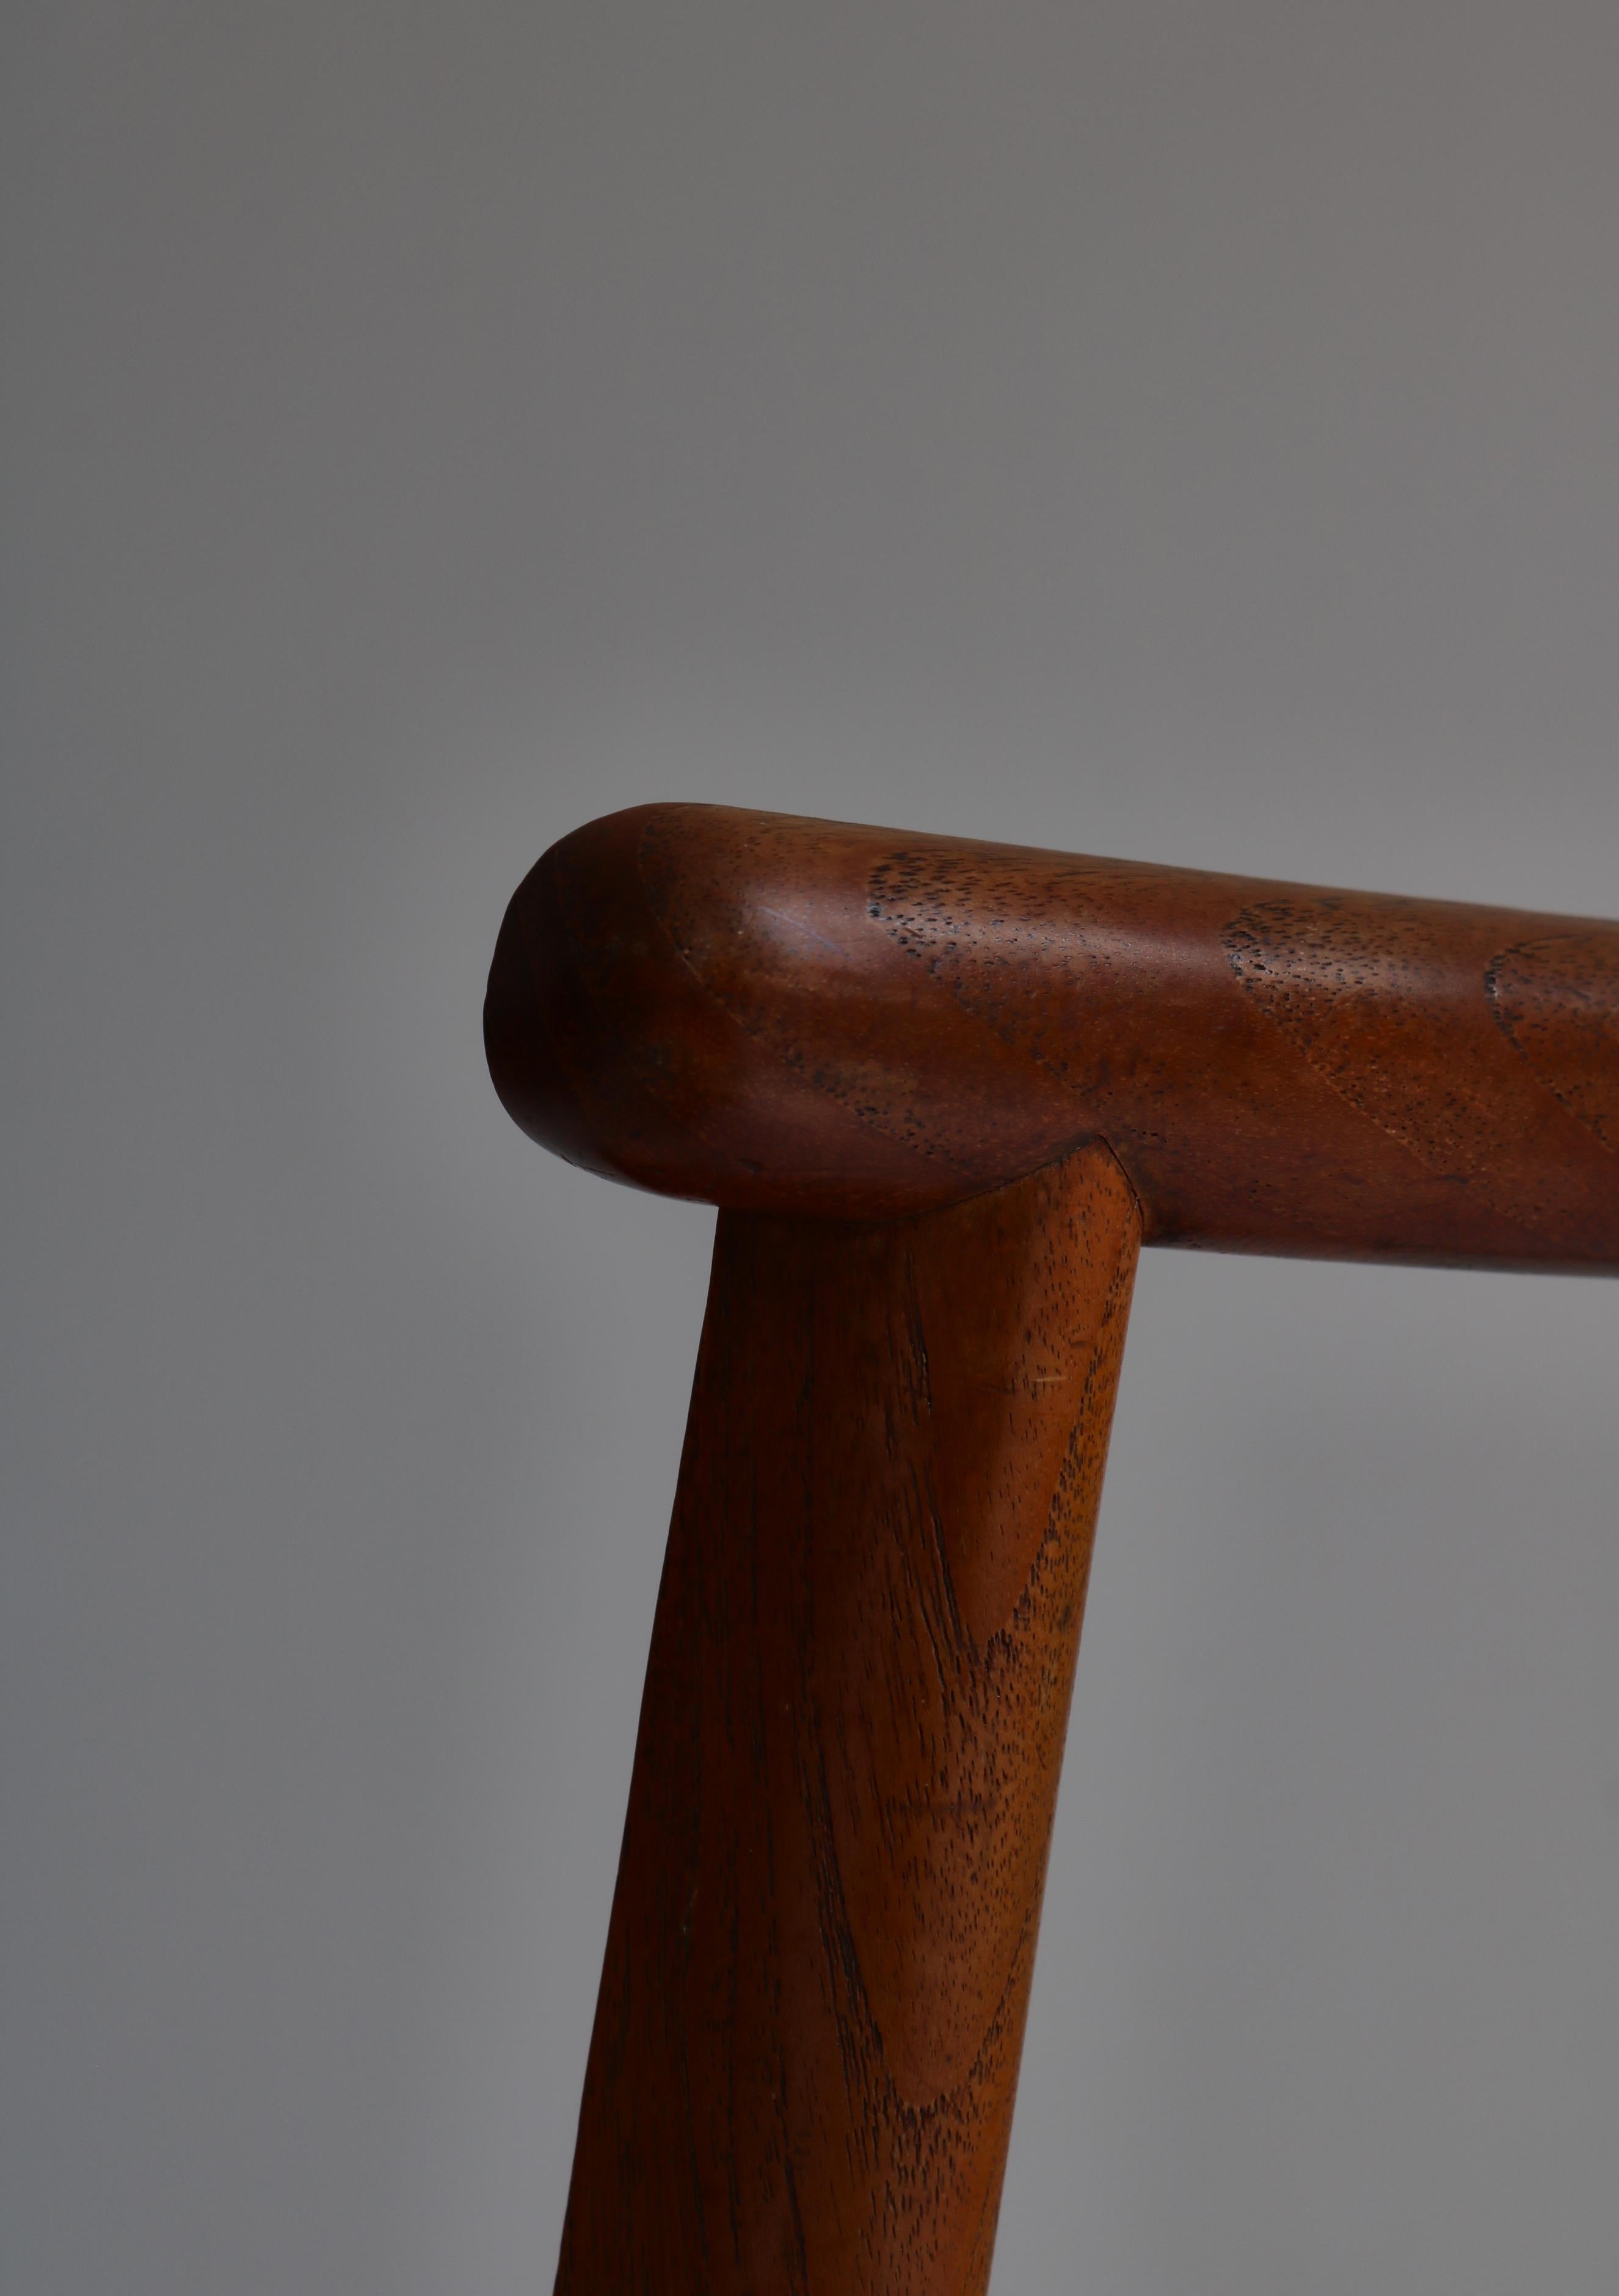 Set of Six Børge Mogensen Dining Chairs in Teak & Niger Leather, 1939, Denmark For Sale 6